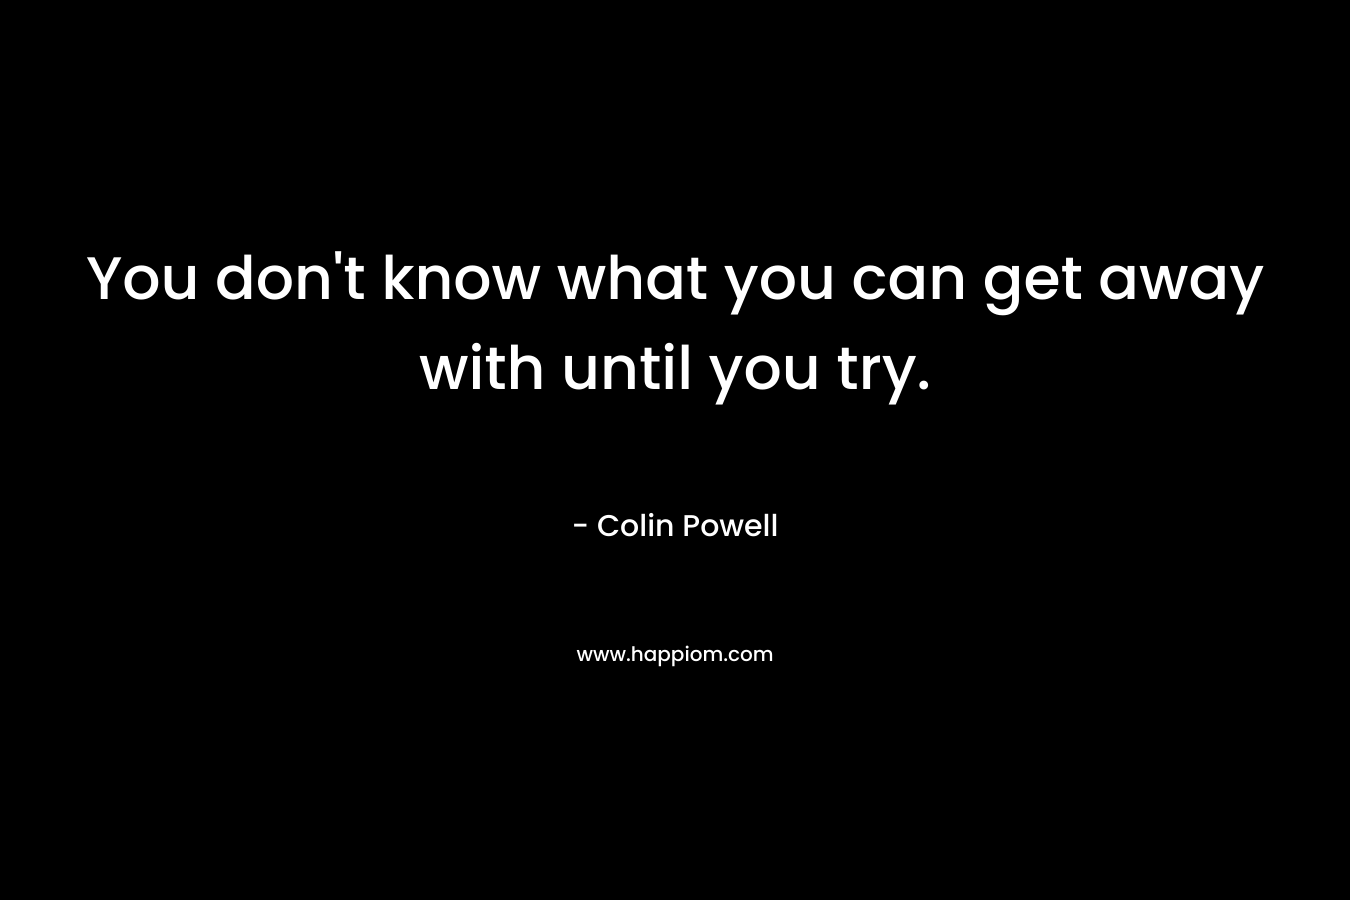 You don’t know what you can get away with until you try. – Colin Powell